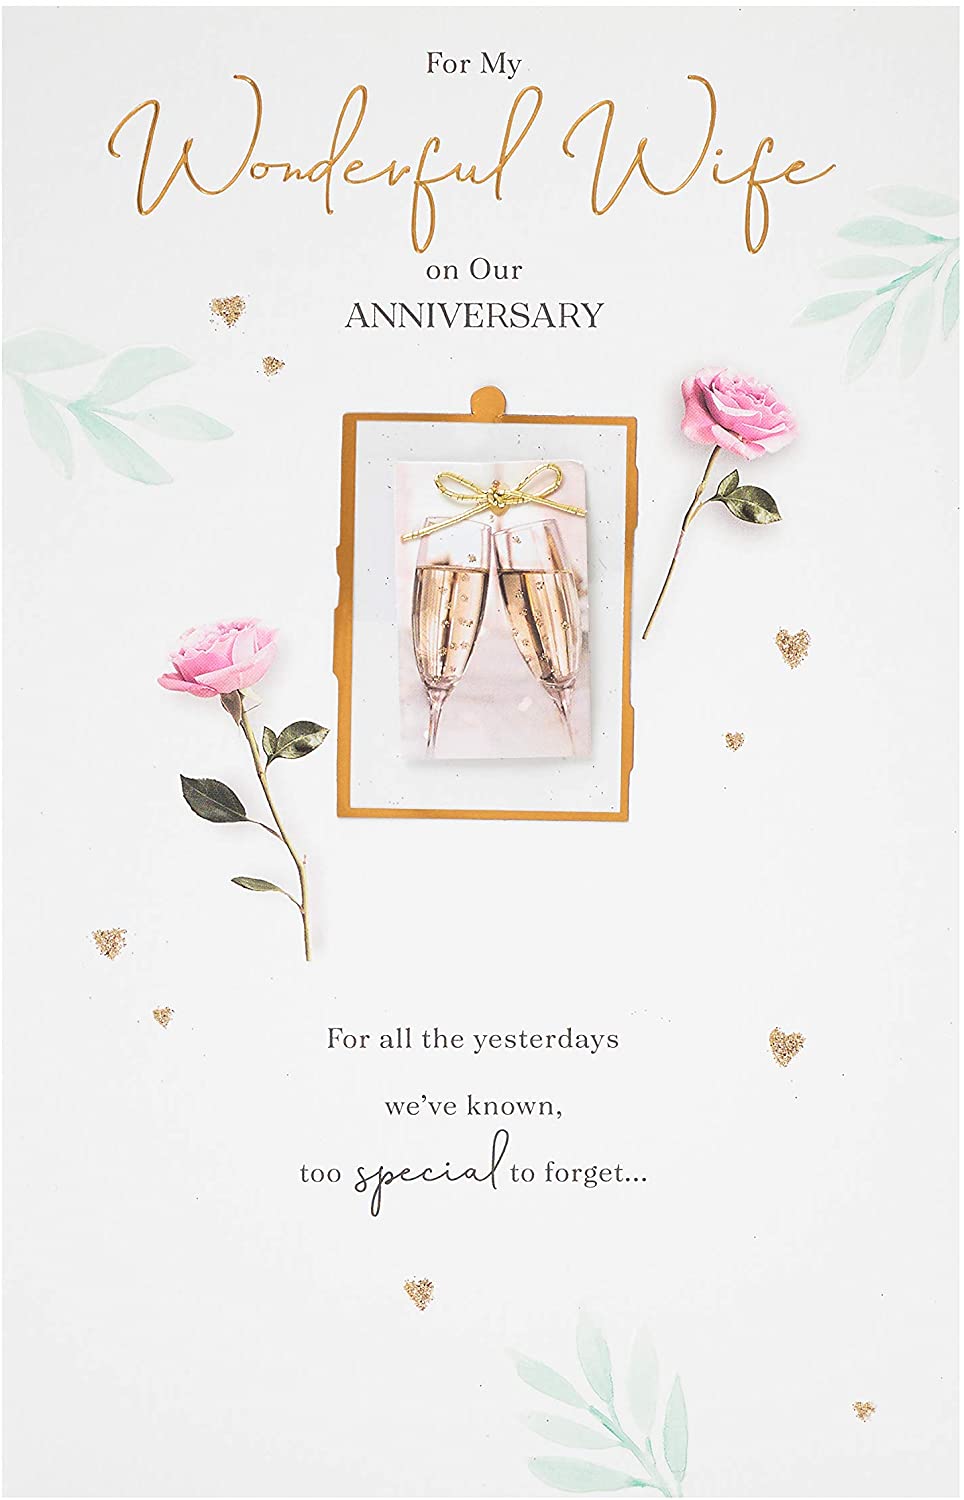 Wife Anniversary Card - Champagne Toast Of Love